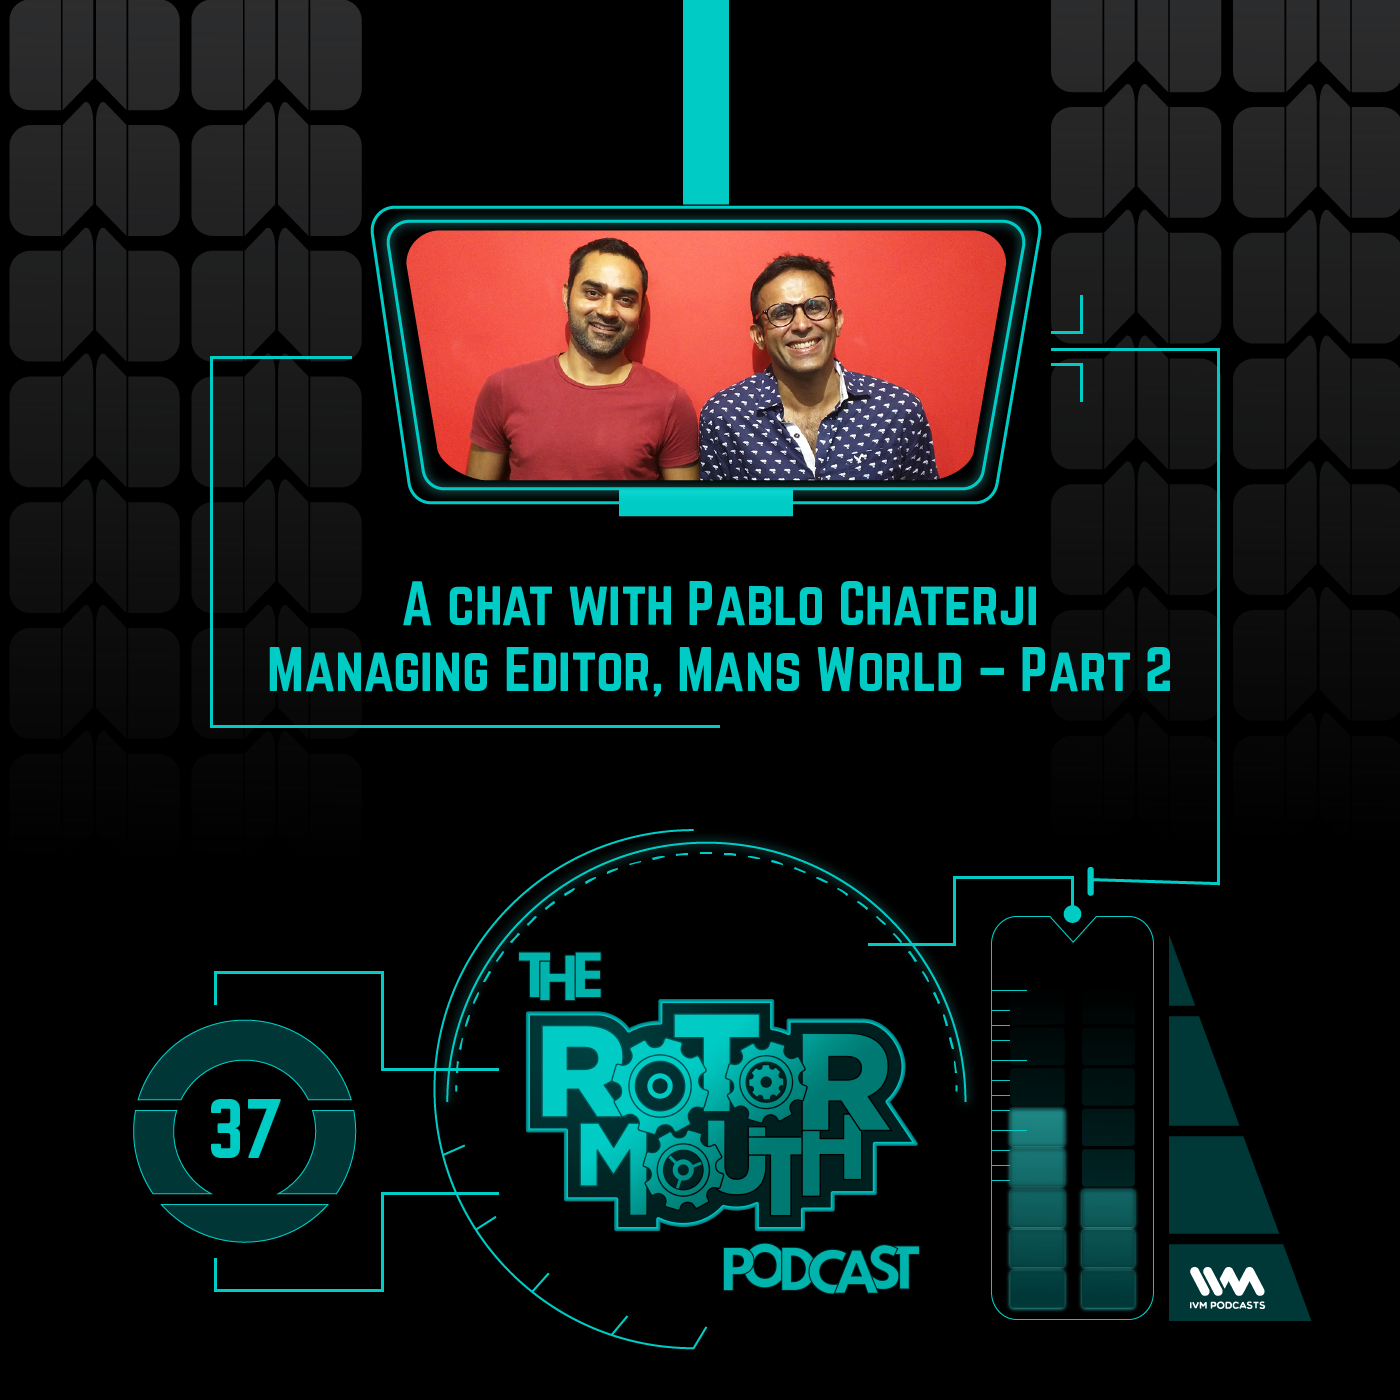 Ep. 37: A Chat with Pablo Chaterji, Managing Director of Man's World - Part 2